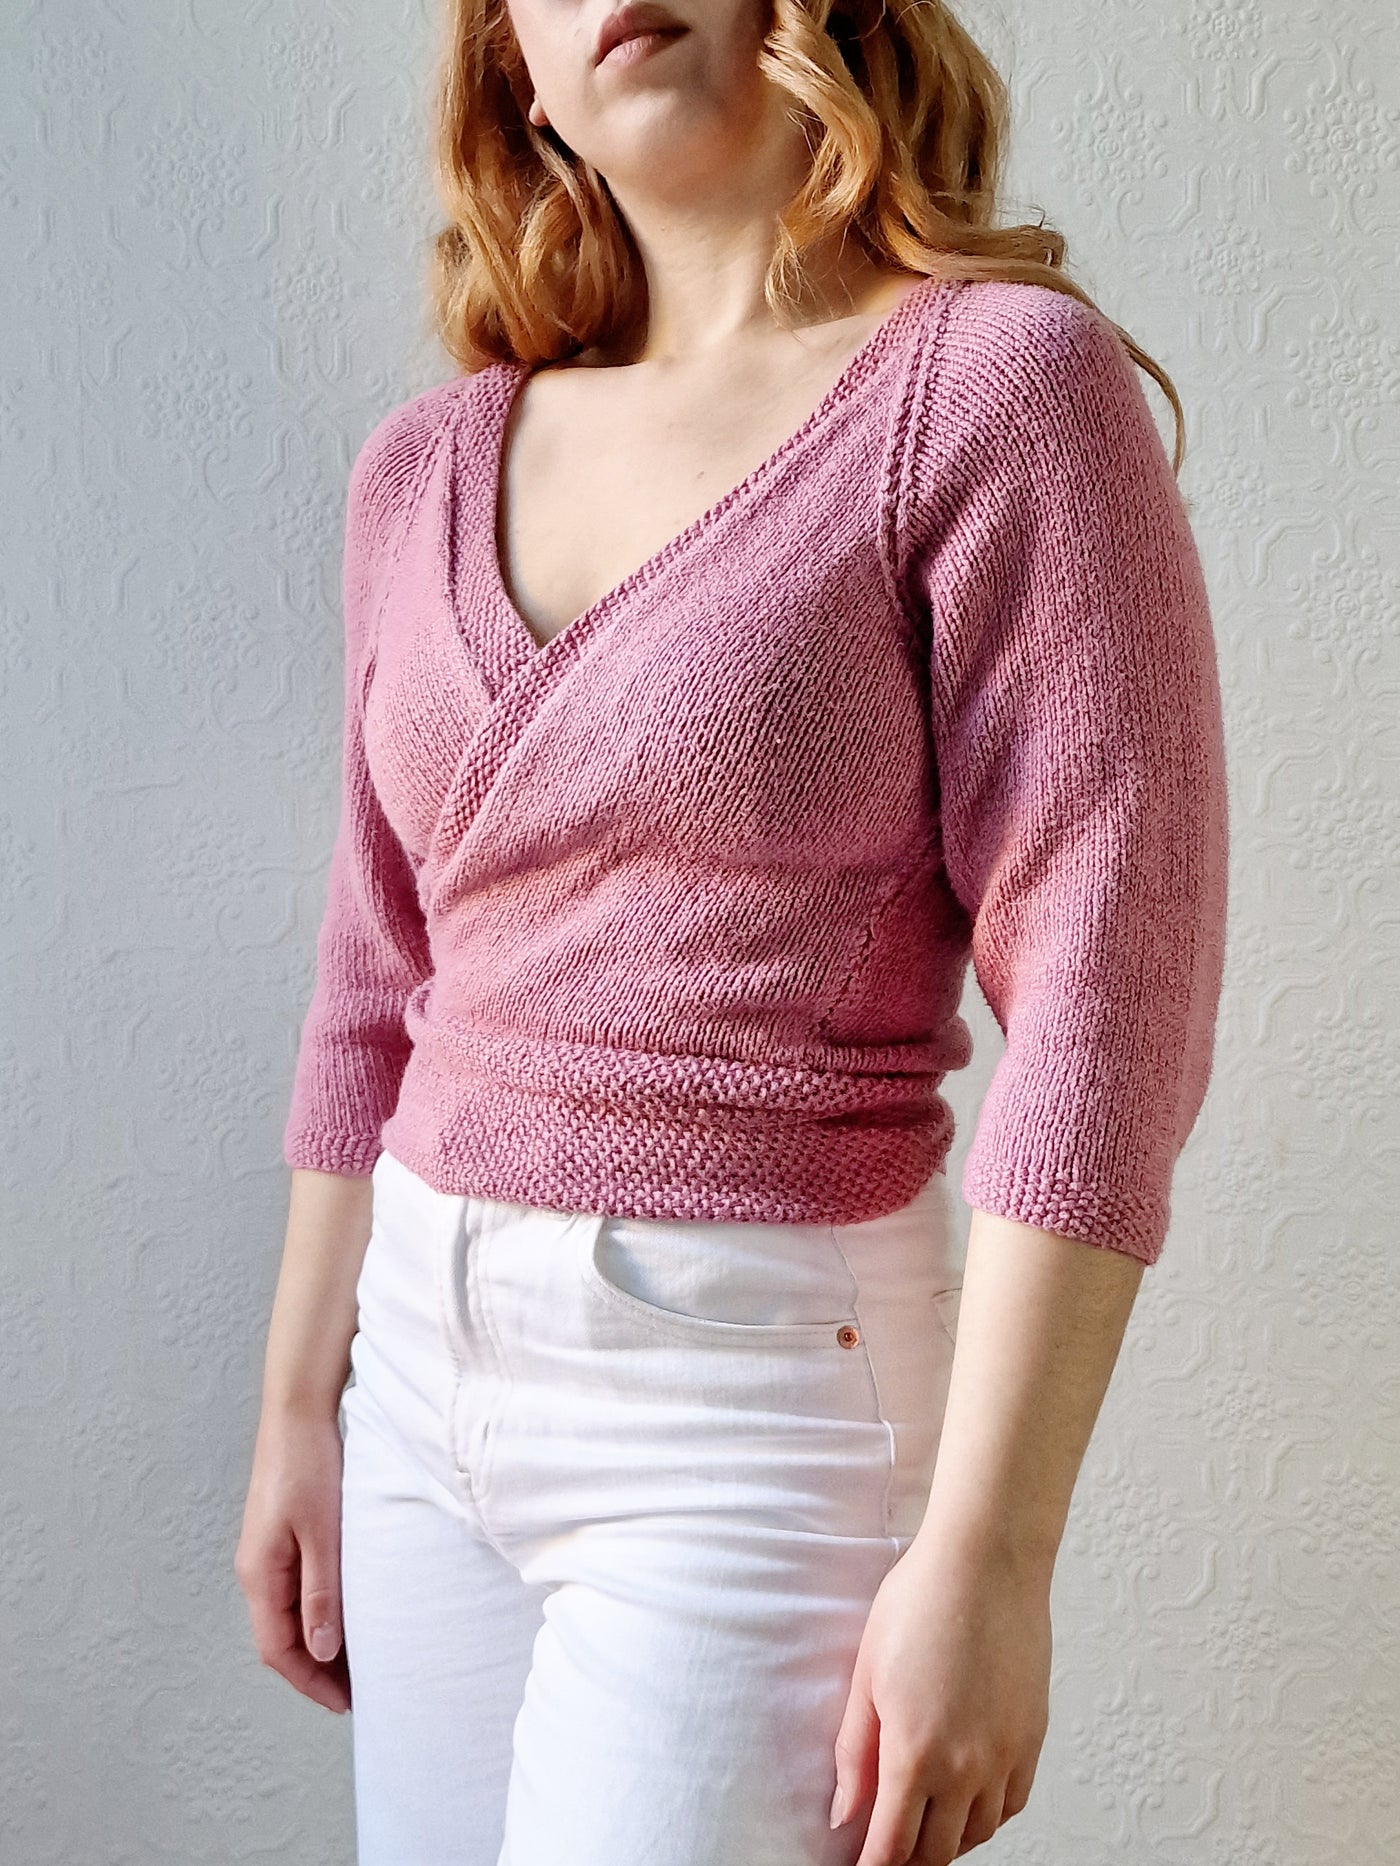 Vintage Knitted Mauve Pink Wrap Cardigan with 3/4 Sleeves - XS